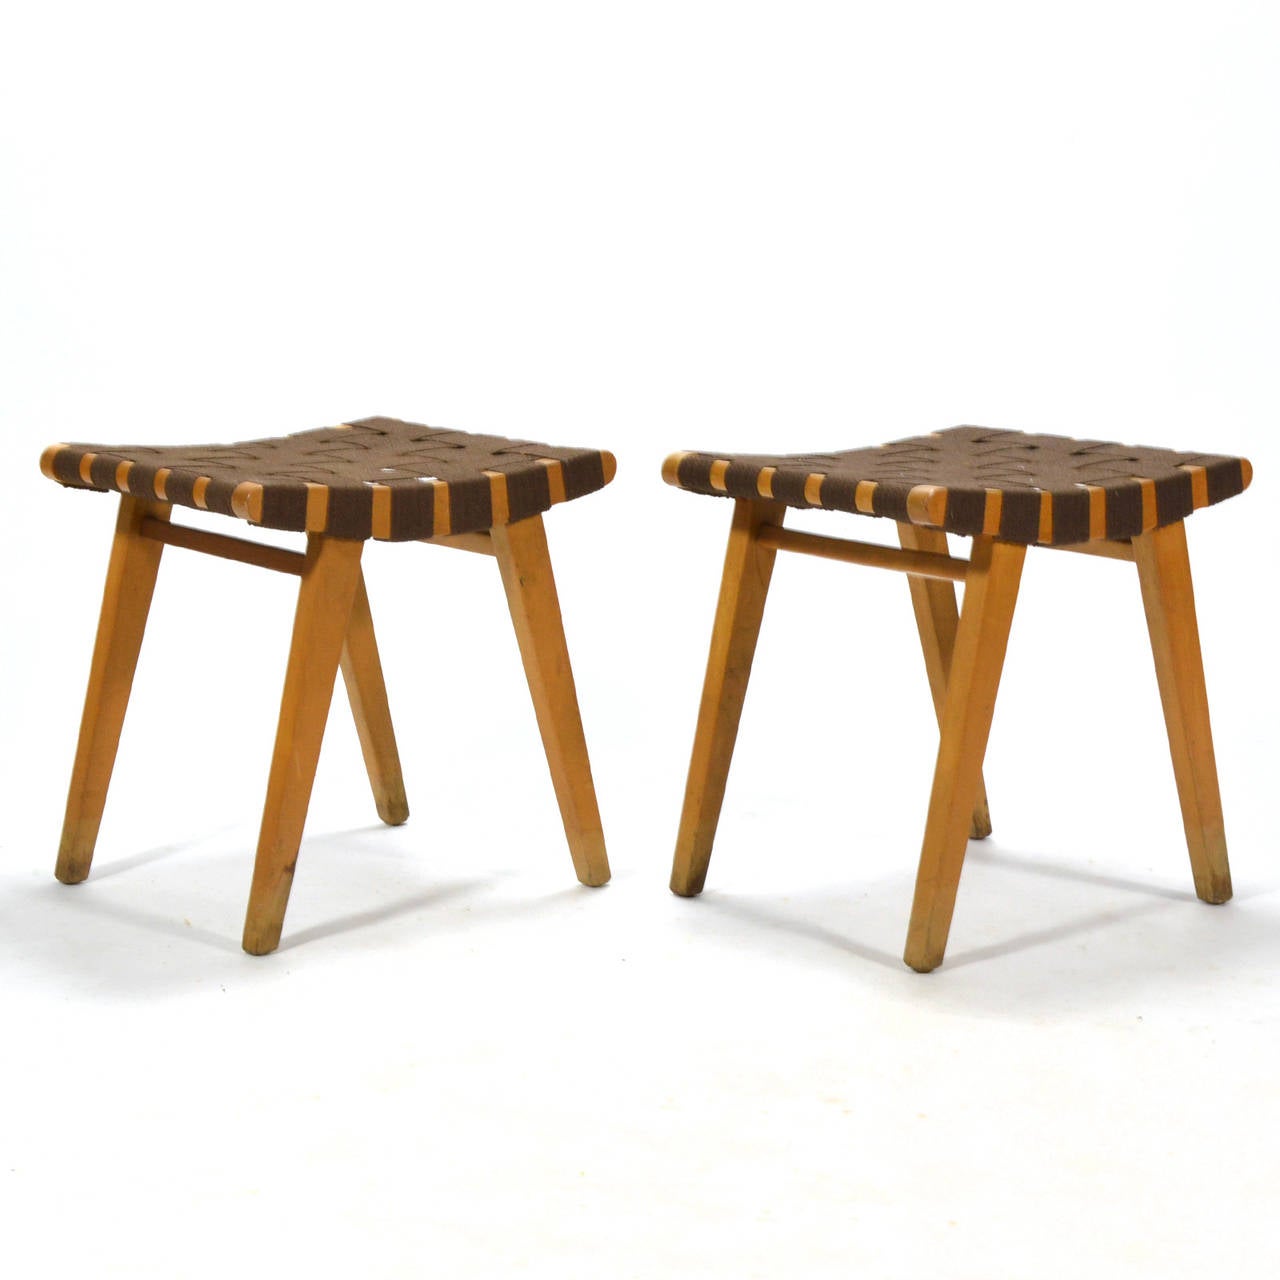 In the 1940s, designers had to cope with material shortages due to the war effort. These stools were among Jens Risom's first designs for Knoll and employed woven webbing in lieu of an upholstered seat. The practical and elegant solution allows the